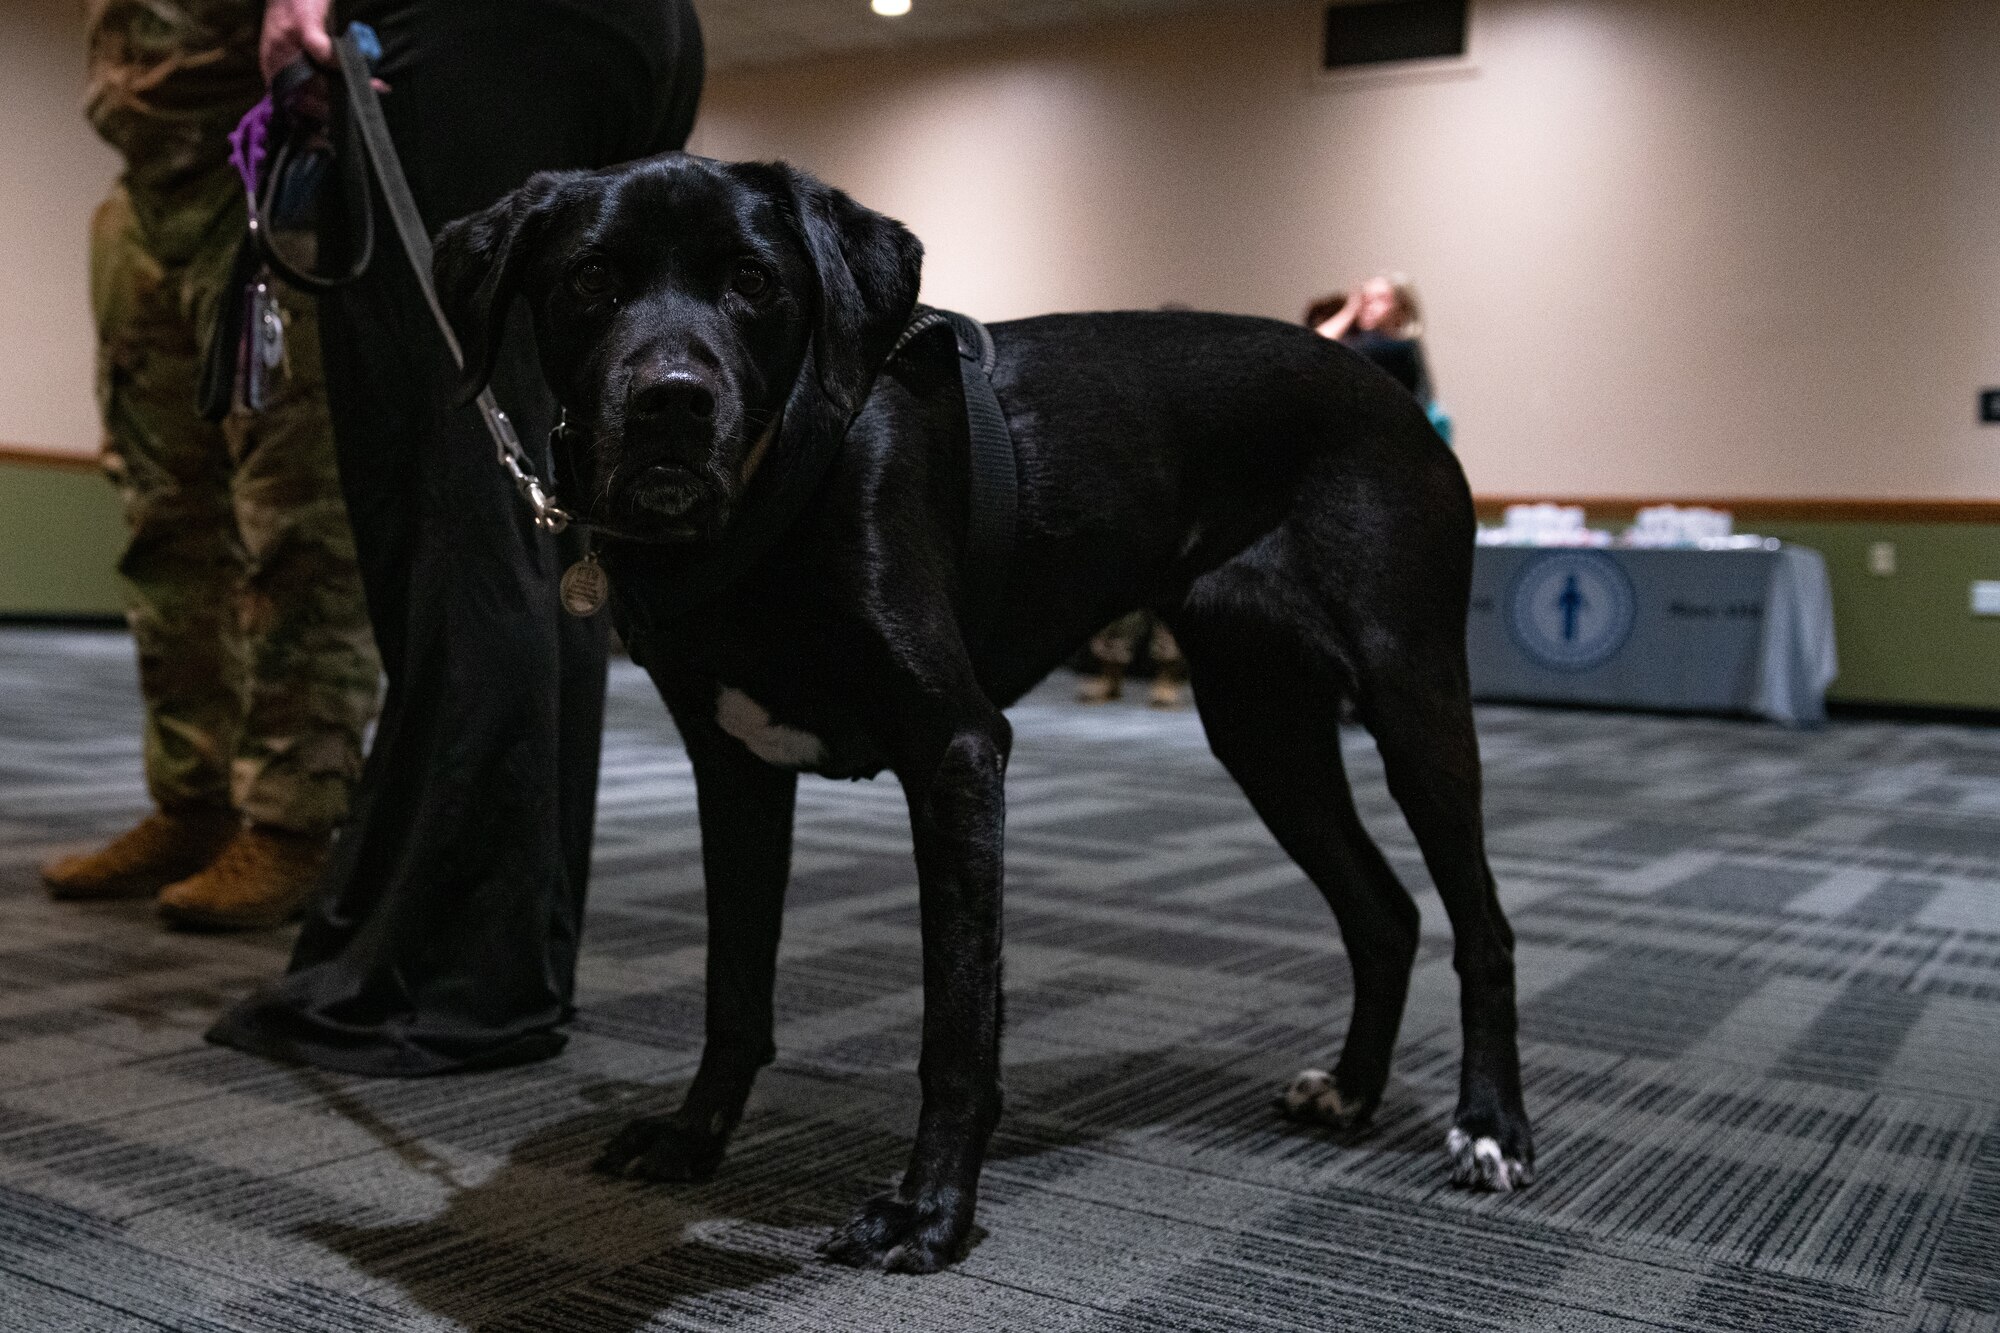 Athena, a service dog, attends the suicide prevention storytellers event at Minot Air Force Base, North Dakota, Sept. 26, 2023. Minot AFB held a suicide prevention storytellers event for National Suicide Prevention Month to raise awareness for suicide prevention and mental health awareness. (U.S. Air Force photo by Airman 1st Class Alyssa Bankston)